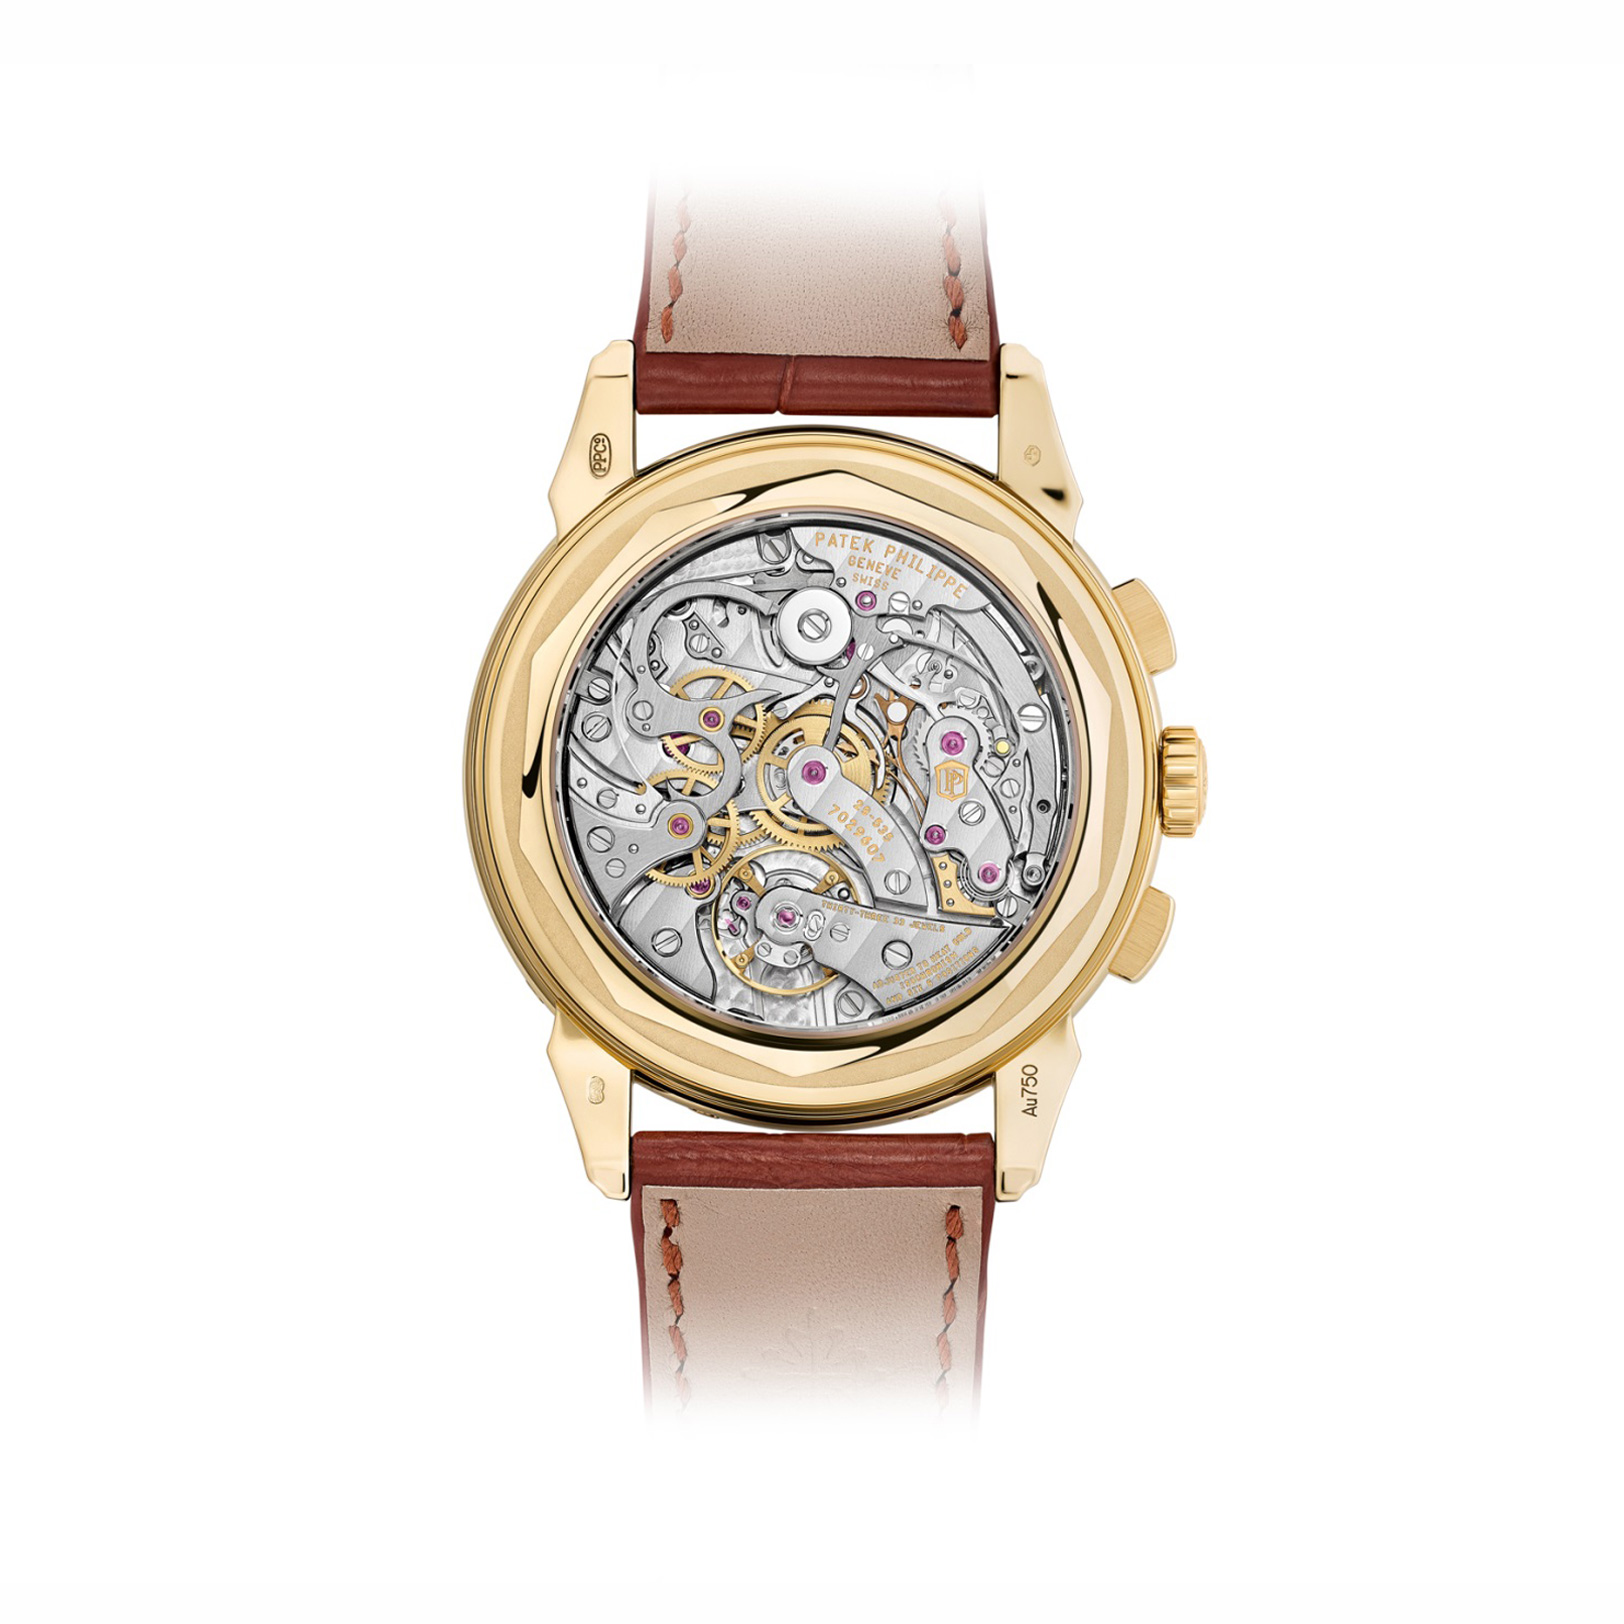 Grand Complications Perpetual Calendar Chronograph Yellow Gold gallery 1